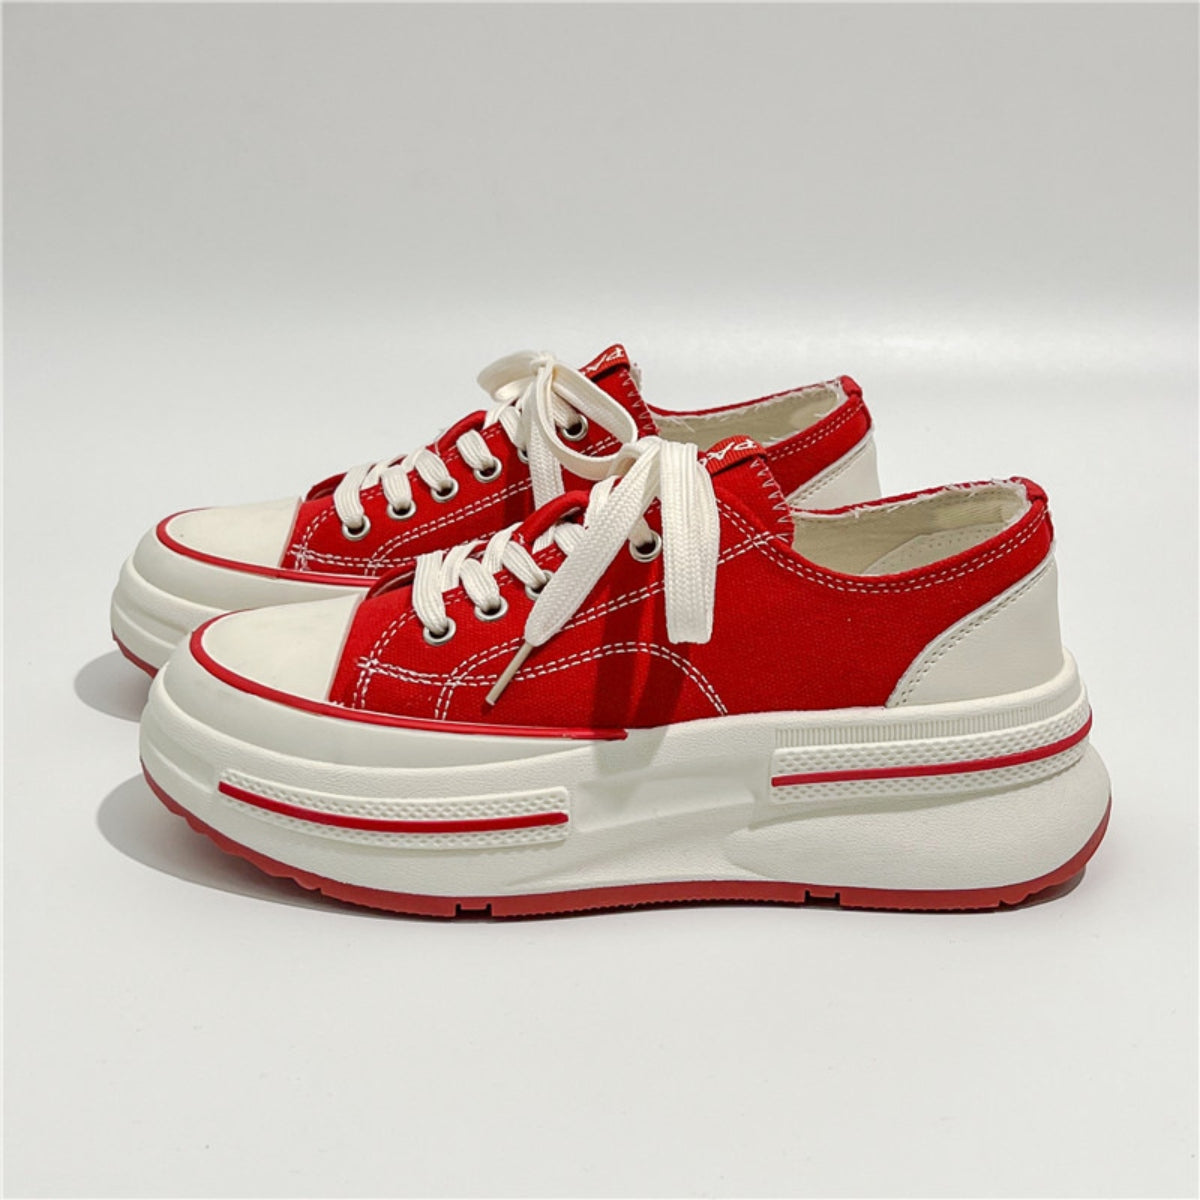 Lace-Up Round Toe Platform Sneakers Deep Red